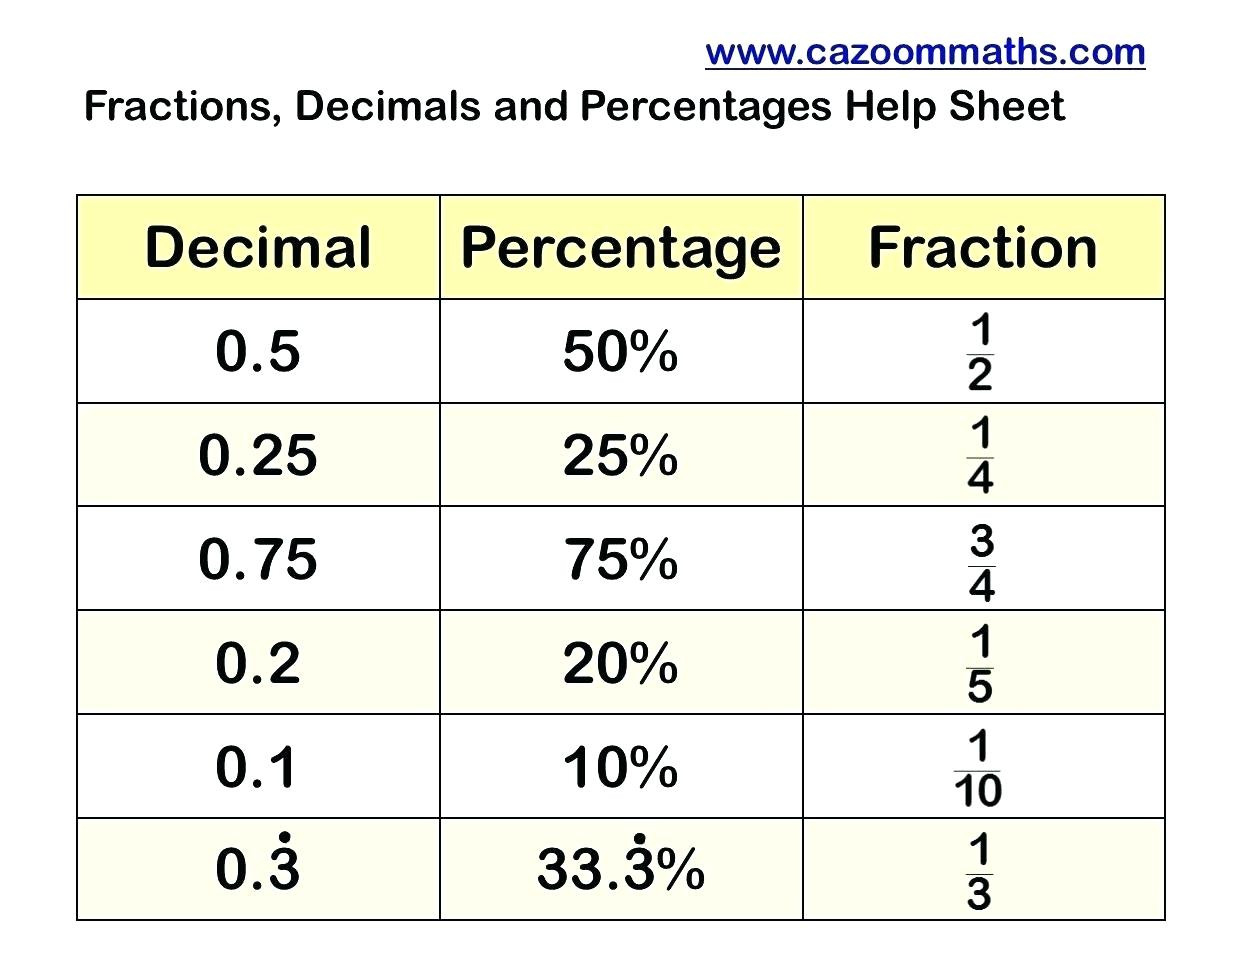 percent-into-fraction-math-fractions-decimals-and-db-excel